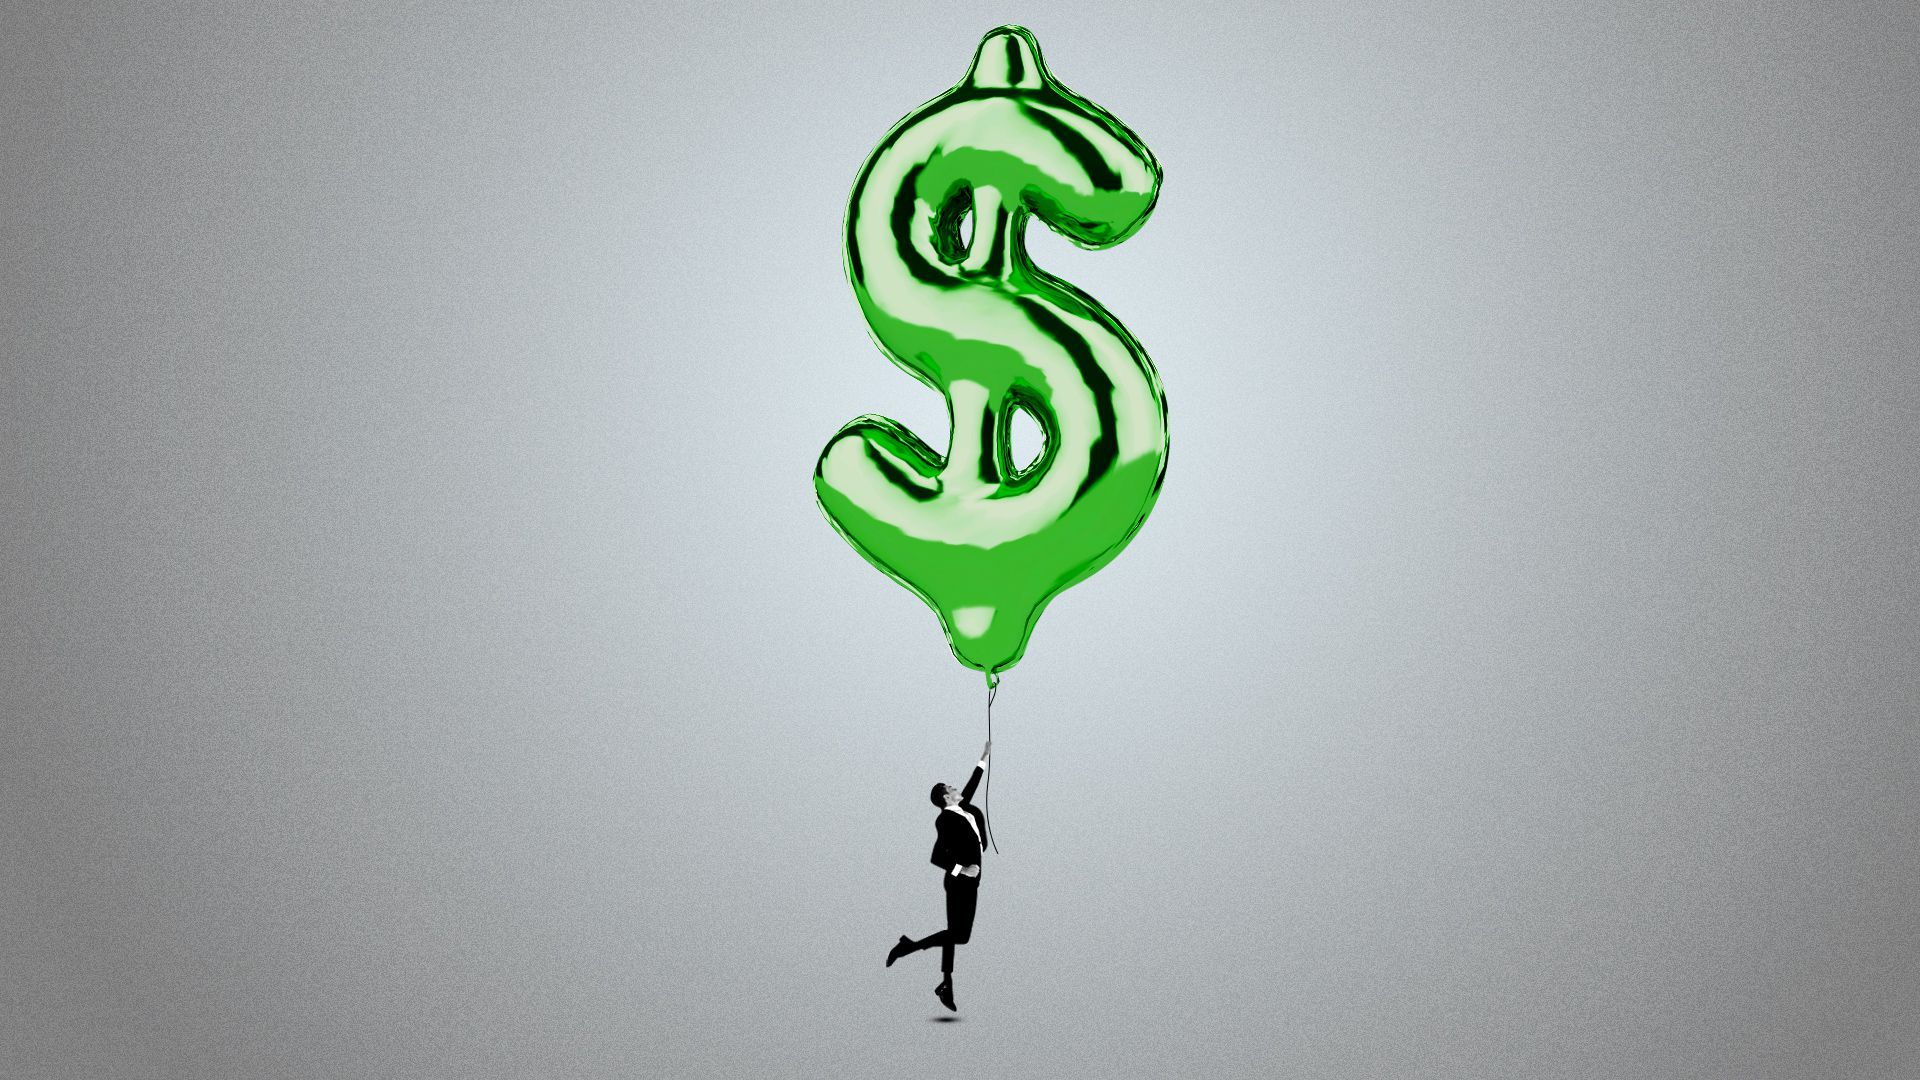 A drawn figure of a person hangs onto a rising balloon in the shape of a dollar sign.